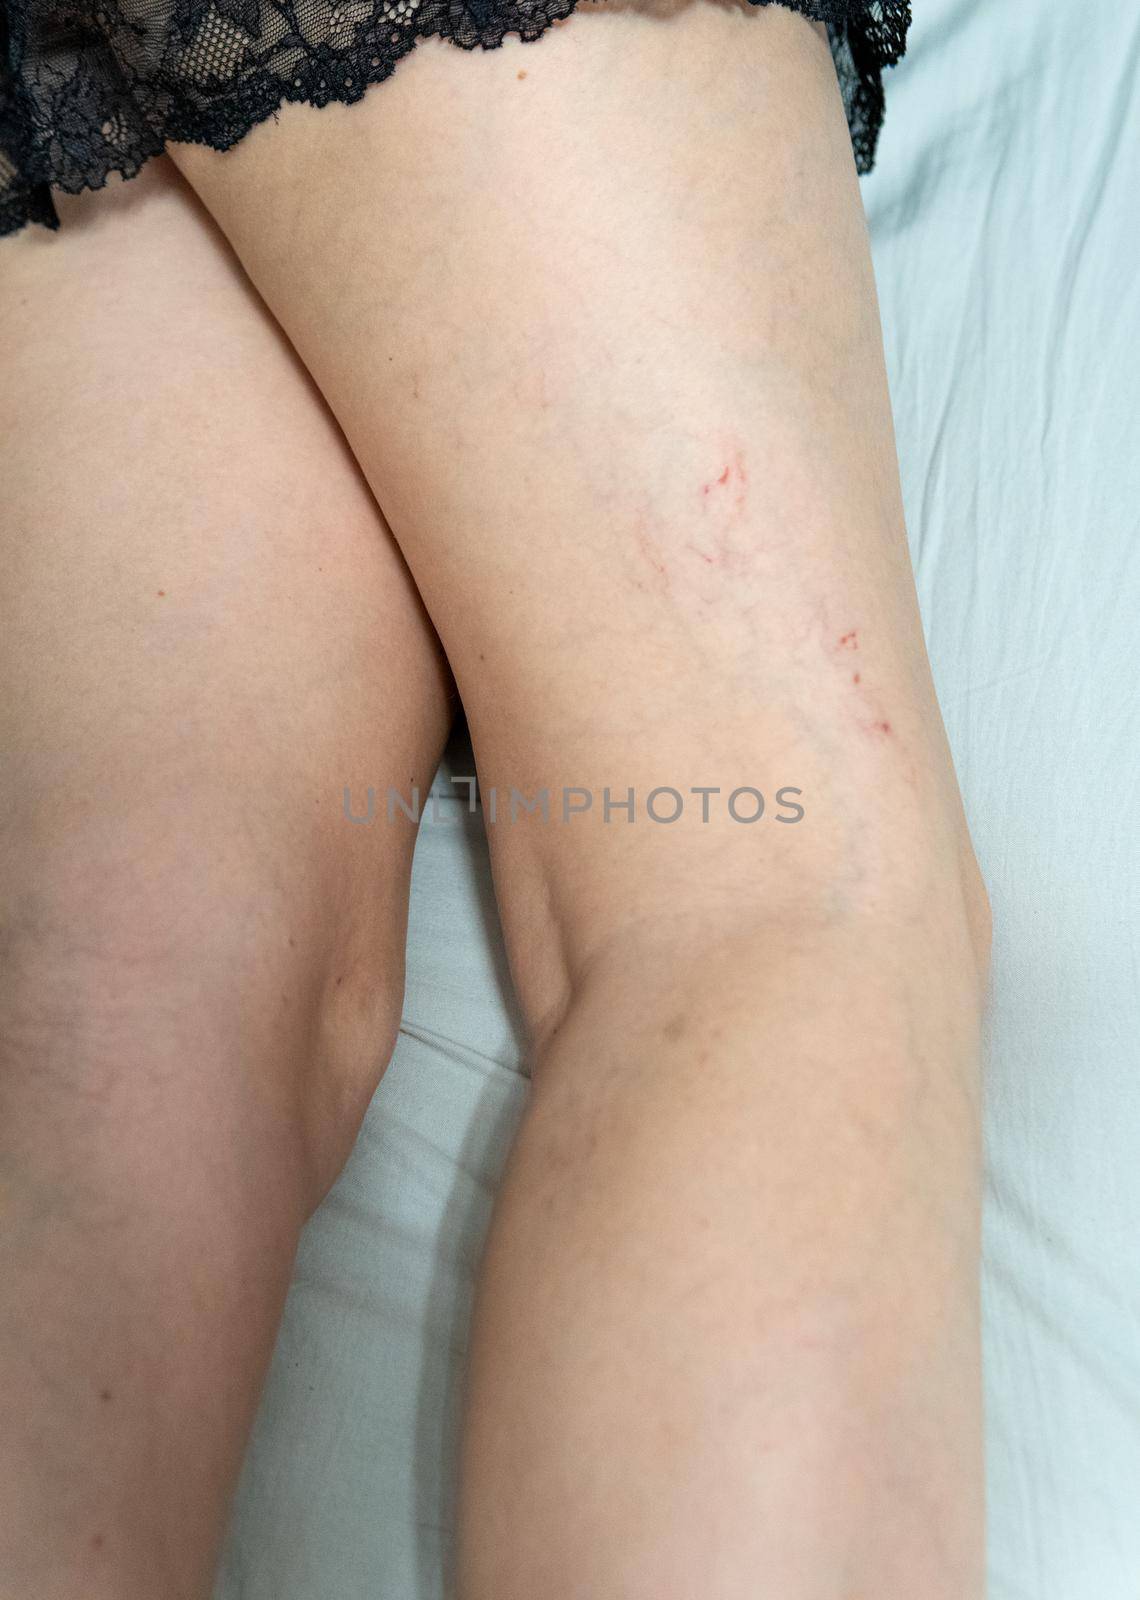 removal of blood vessels by laser thrombosis venous surgery, problem patient close up, veins anatomy. lifestyle enlarged, dermatological telangiectases physical